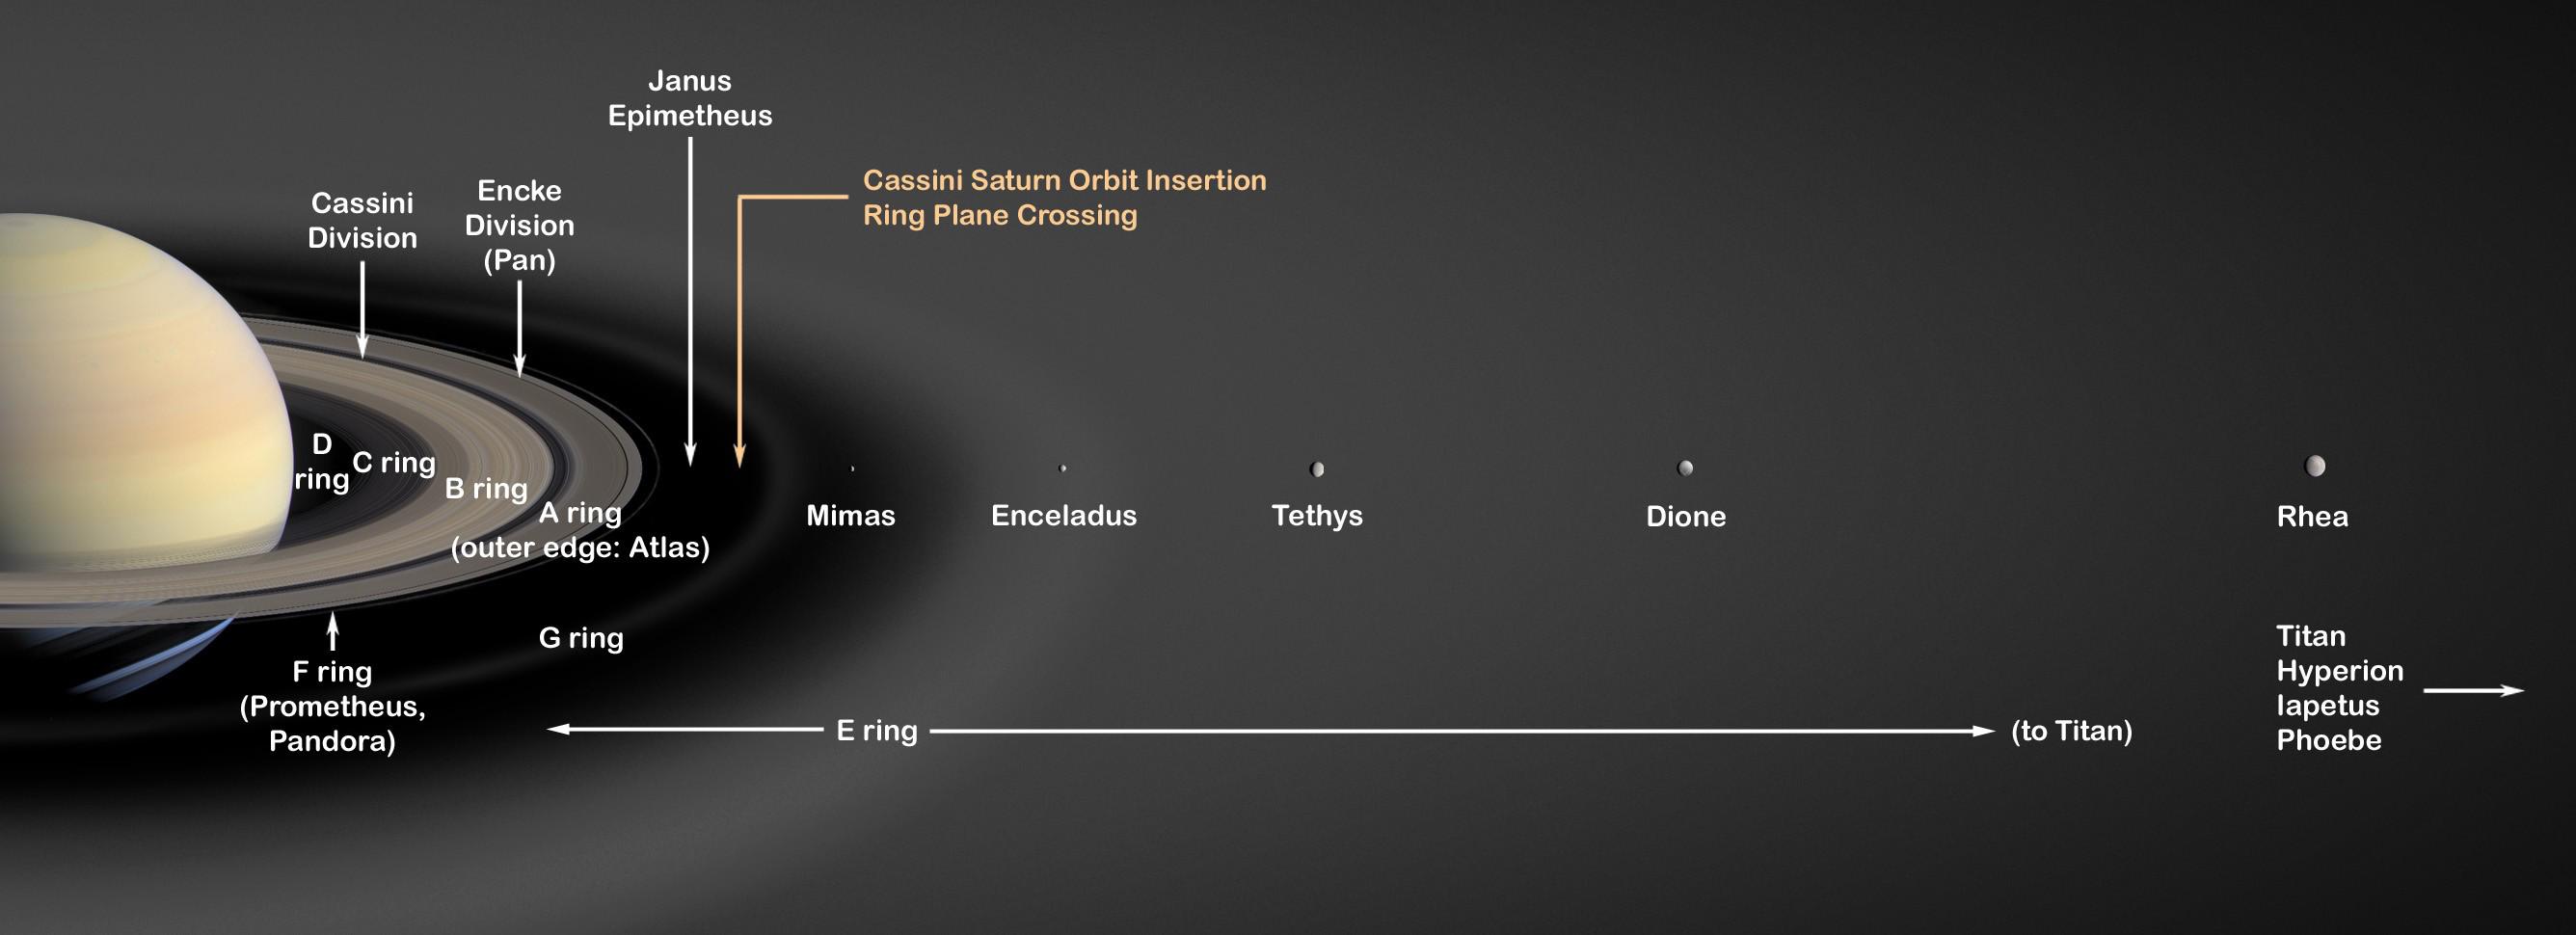 diagram showing saturn's rings and relative distance of its moons